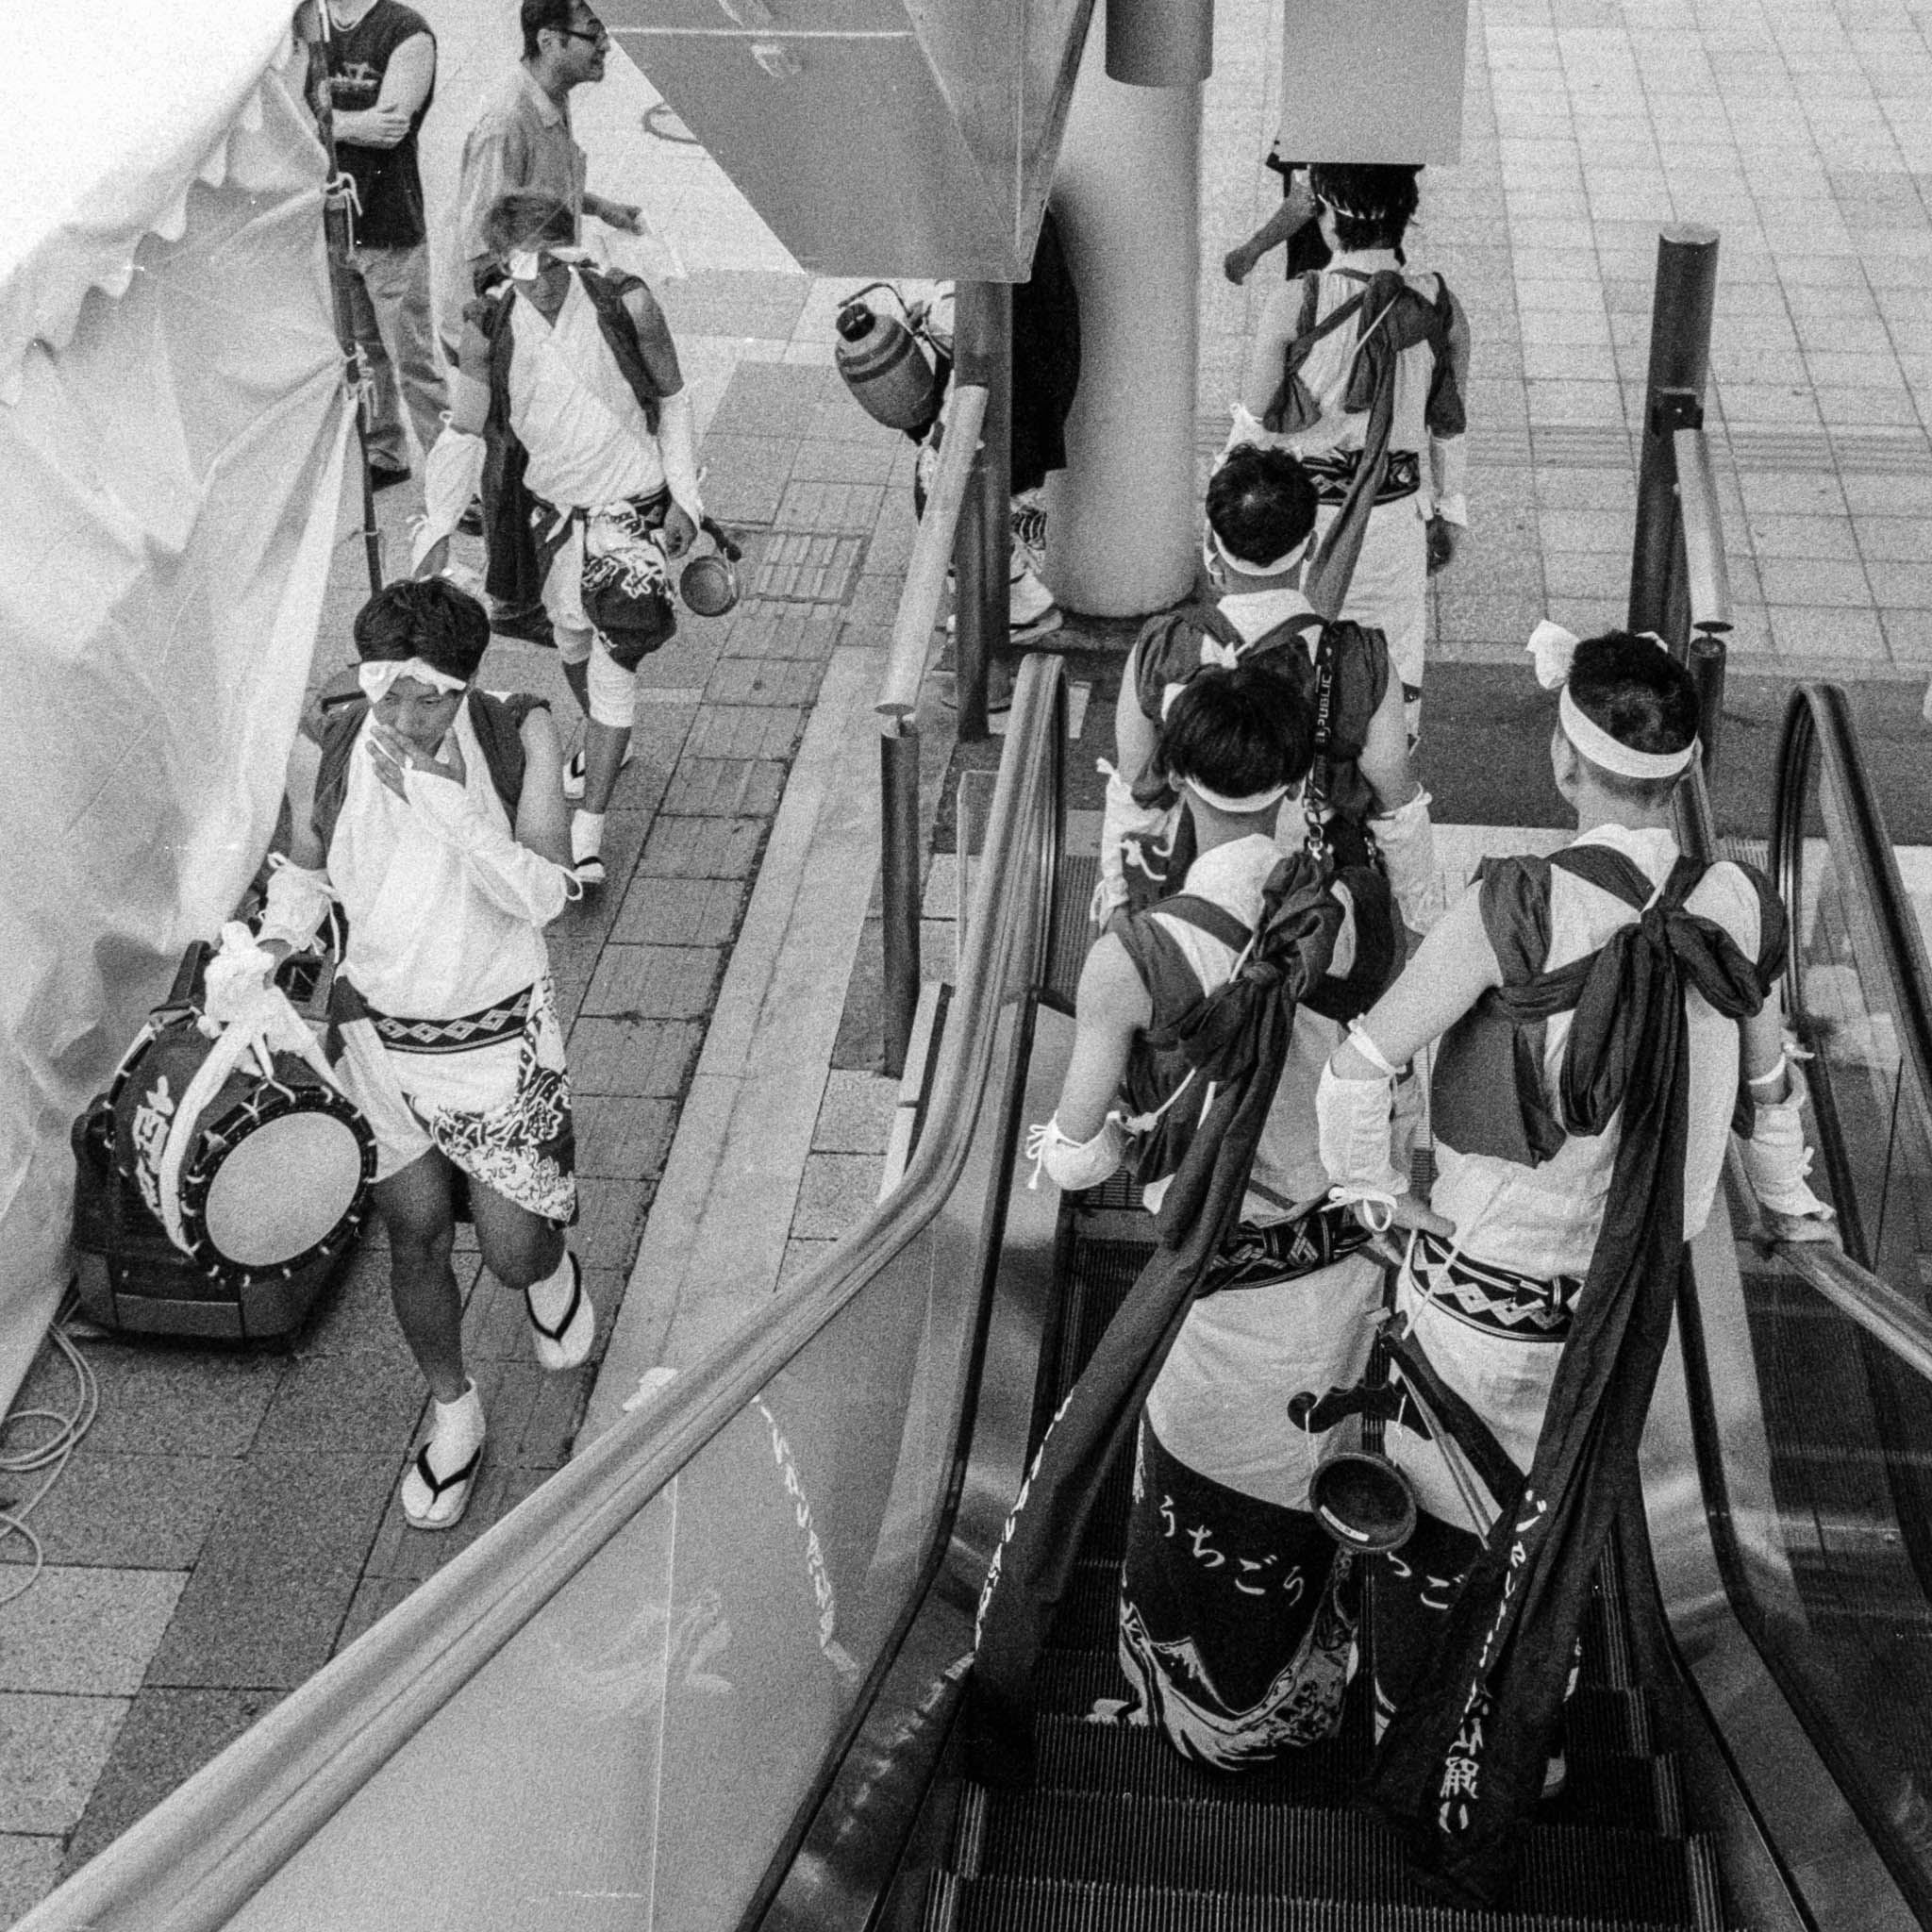 Japanese drummers in traditional attire on escalator, merging culture with modern urban life.